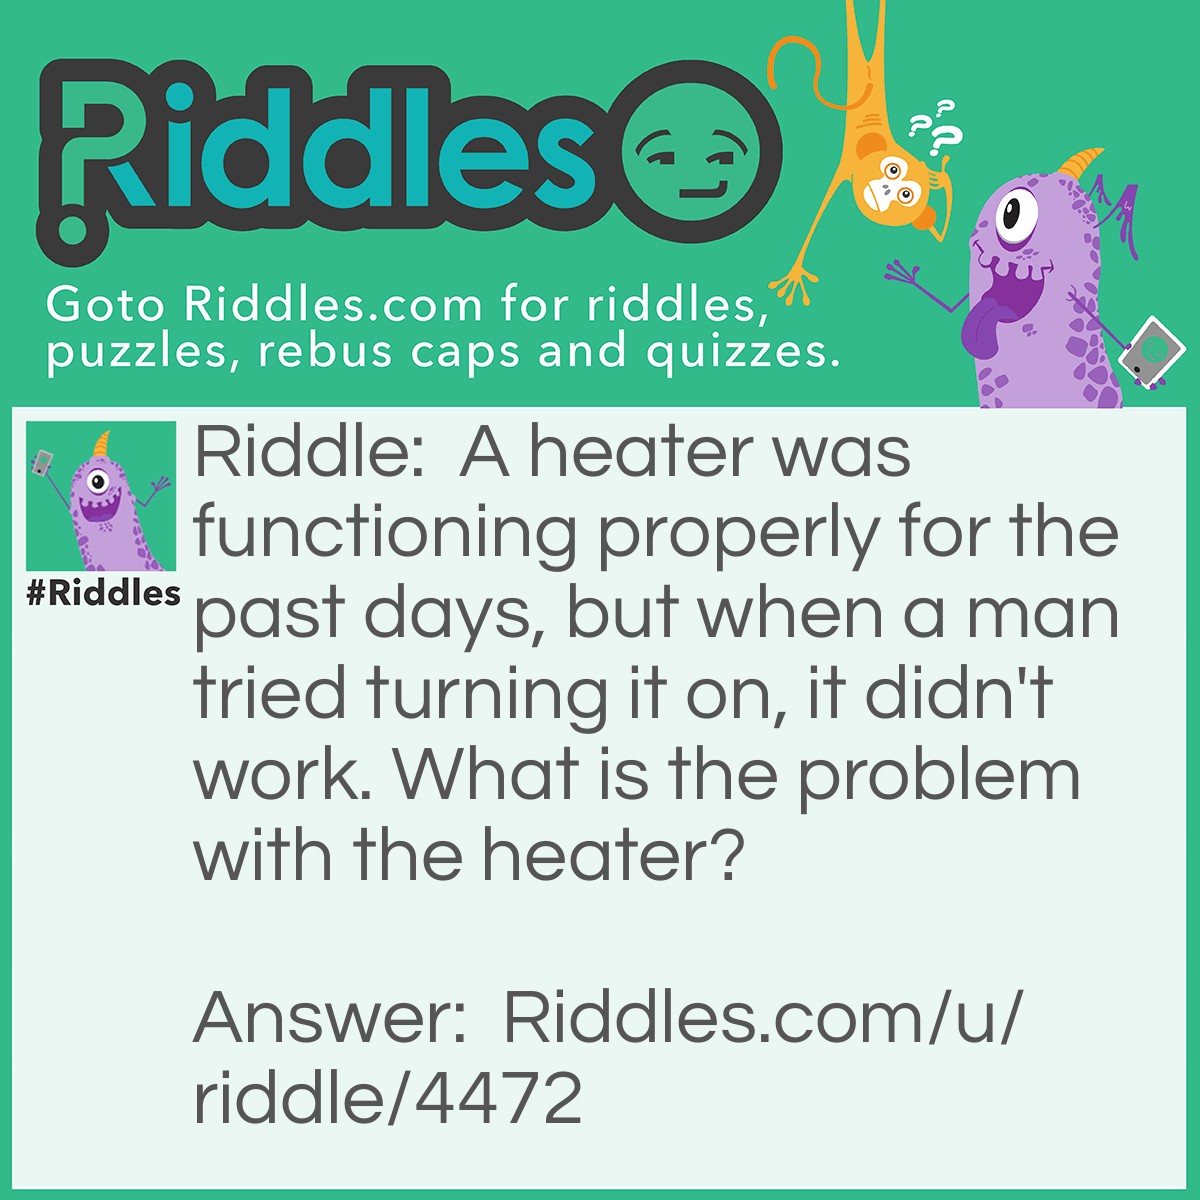 Riddle: A heater was functioning properly for the past days, but when a man tried turning it on, it didn't work. What is the problem with the heater? Answer: The heater wasn't connected to an electricity outlet.